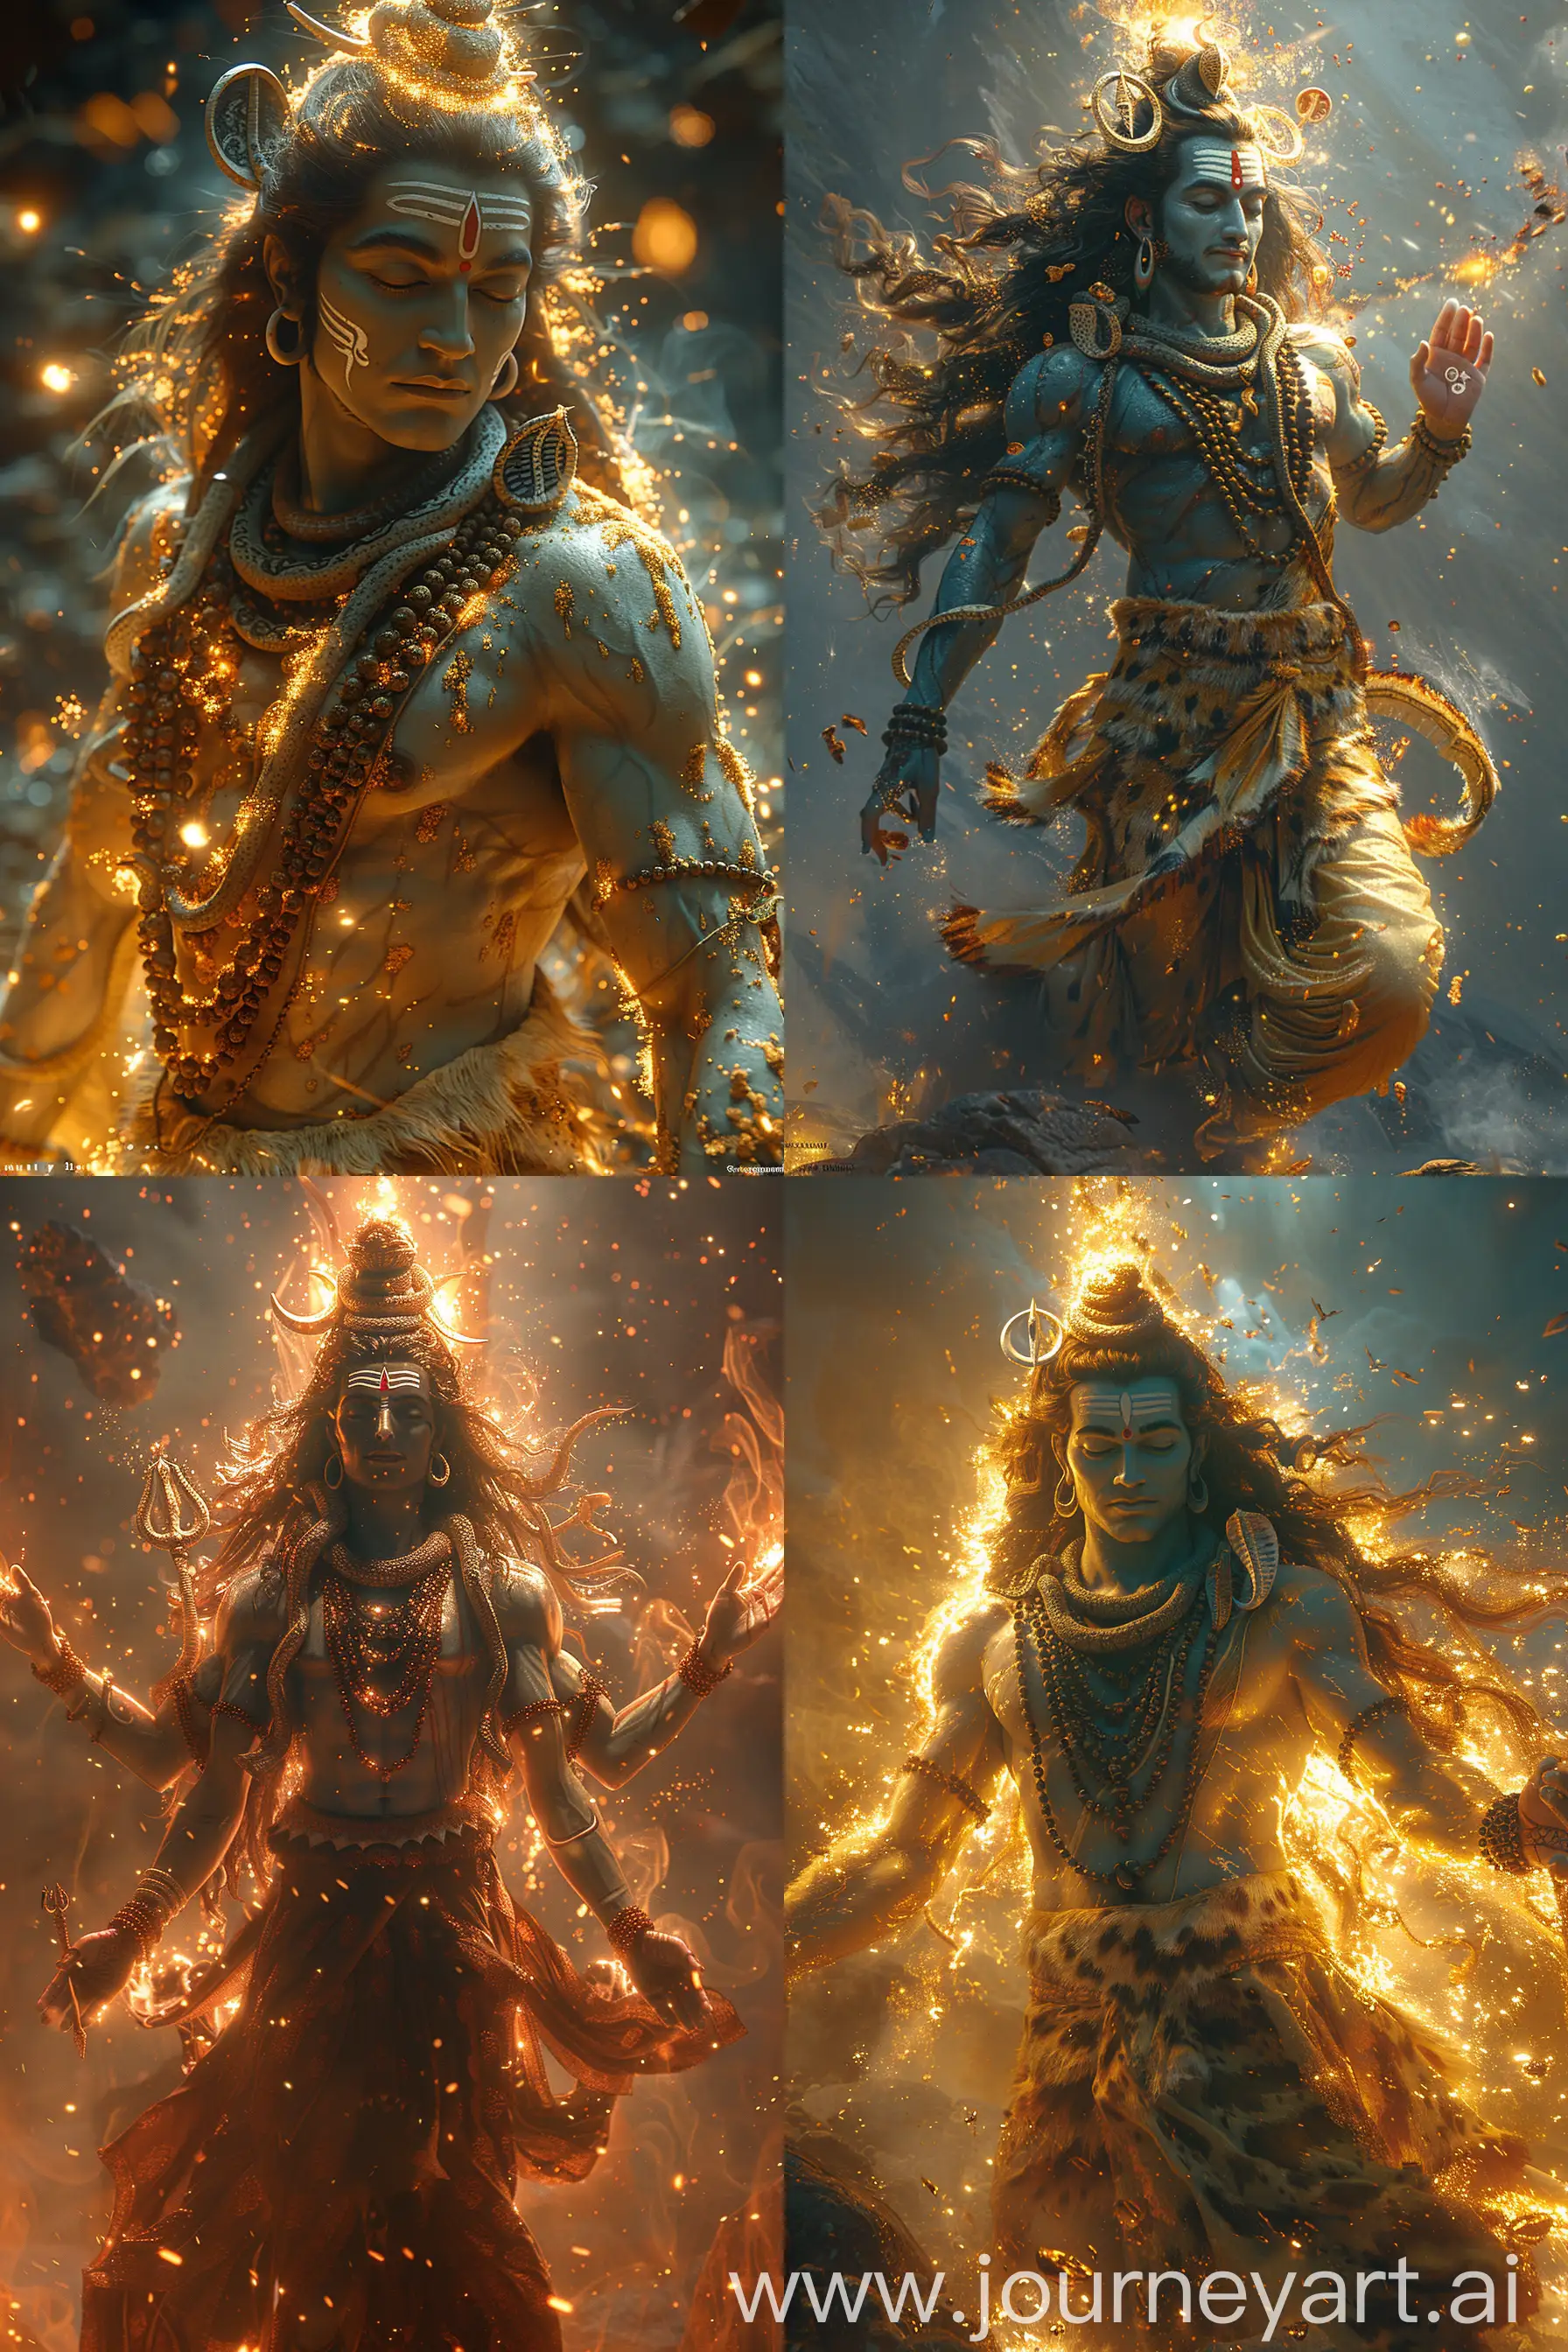 Award-winning cinematic portrayal of Lord Shiva, high fantasy style, ornate details and sacred symbols, backlighting with mystical Himalayan ambiance, cosmic dance of destruction and creation motif, Shiva as Nataraja with damru, trishula, vivid contrasts and ethereal glow, masterpiece visual artistry --ar 2:3 --s 700 --v 6